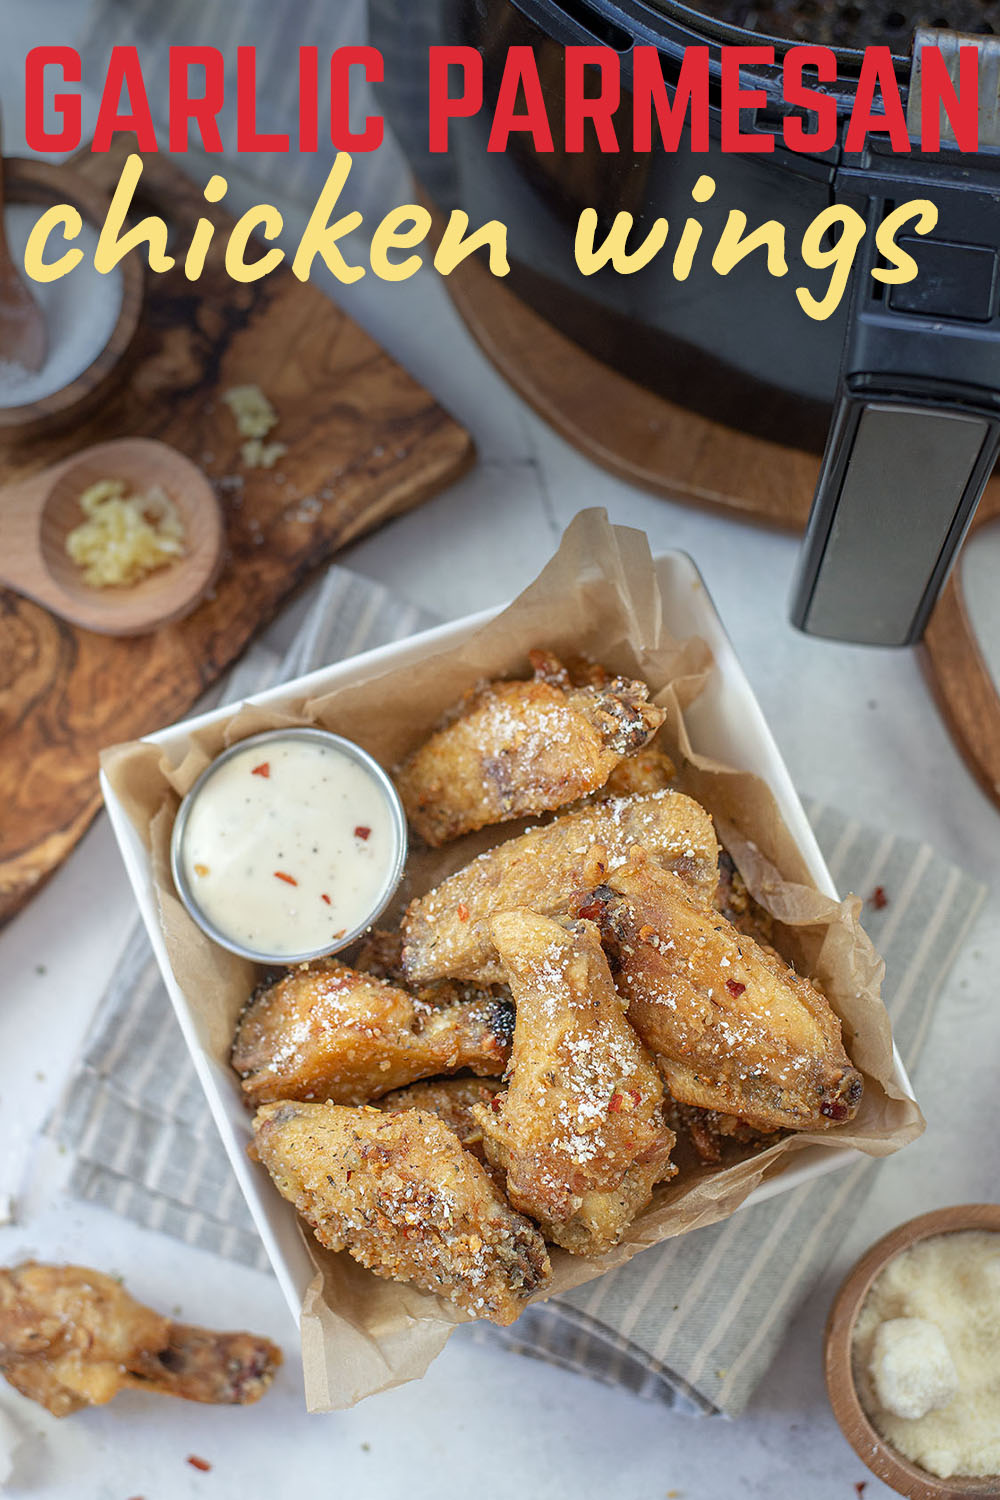 These air fryer chicken wings are tossed in our homemade Garlic Parmesan Sauce - rich, buttery, and so much garlic!